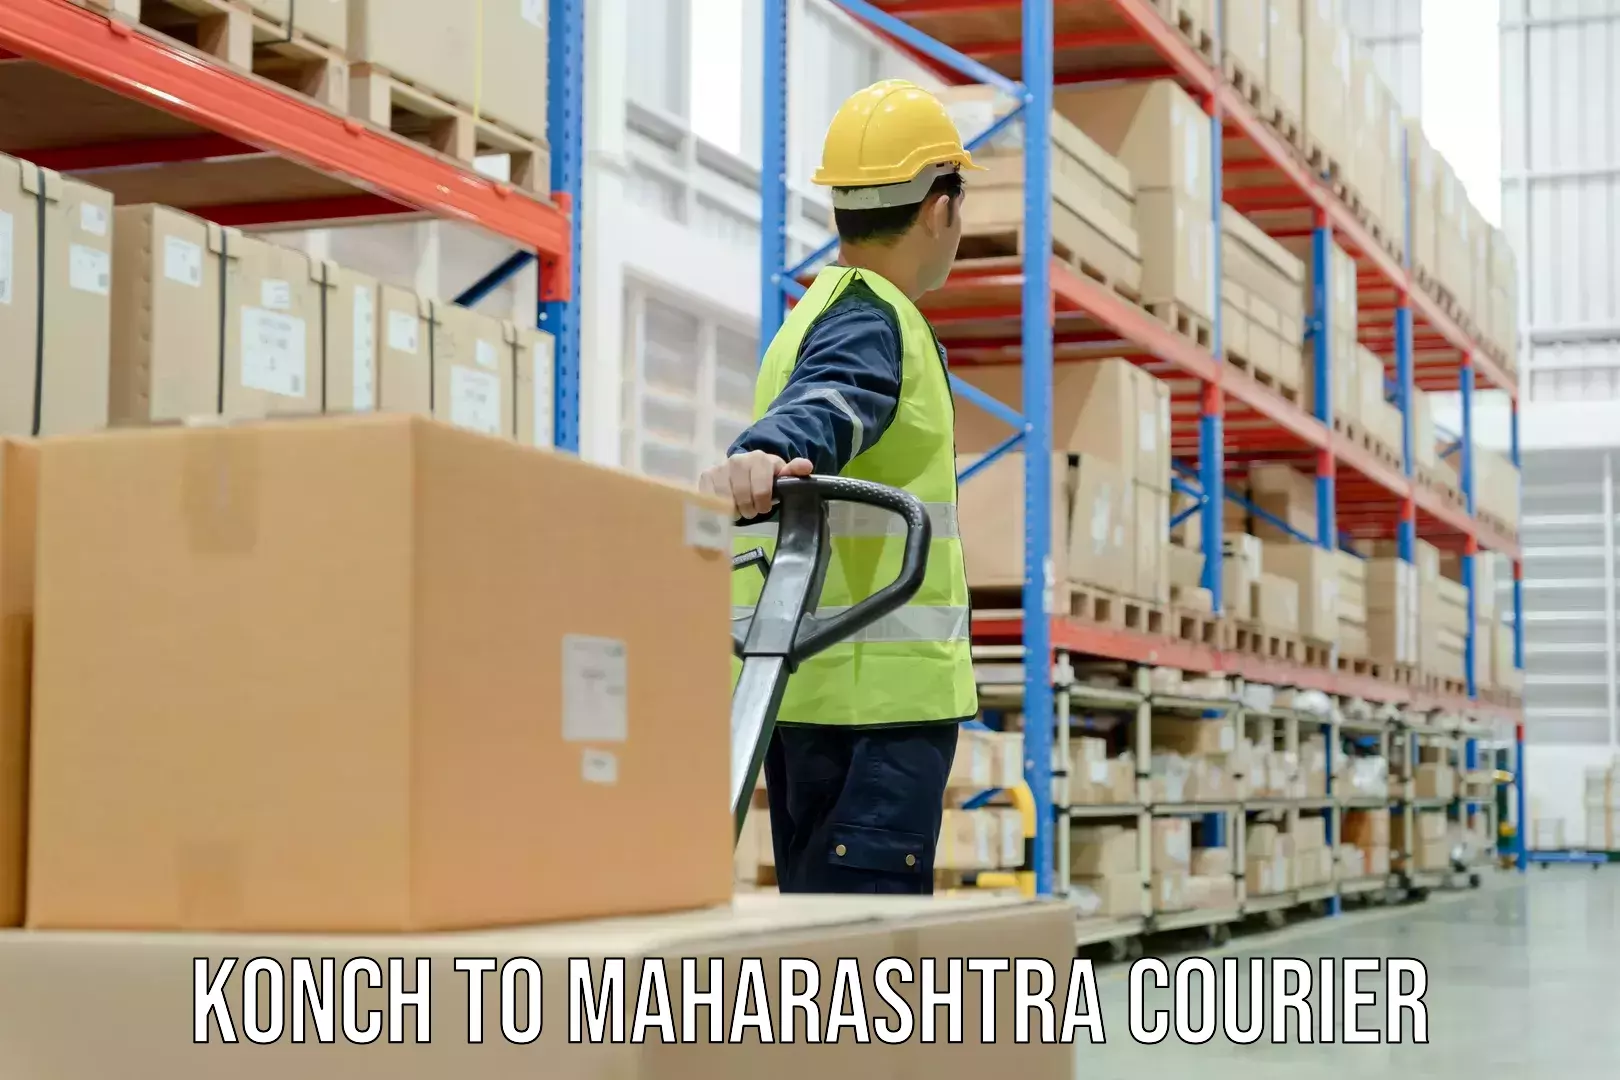 Courier tracking online Konch to Maharashtra